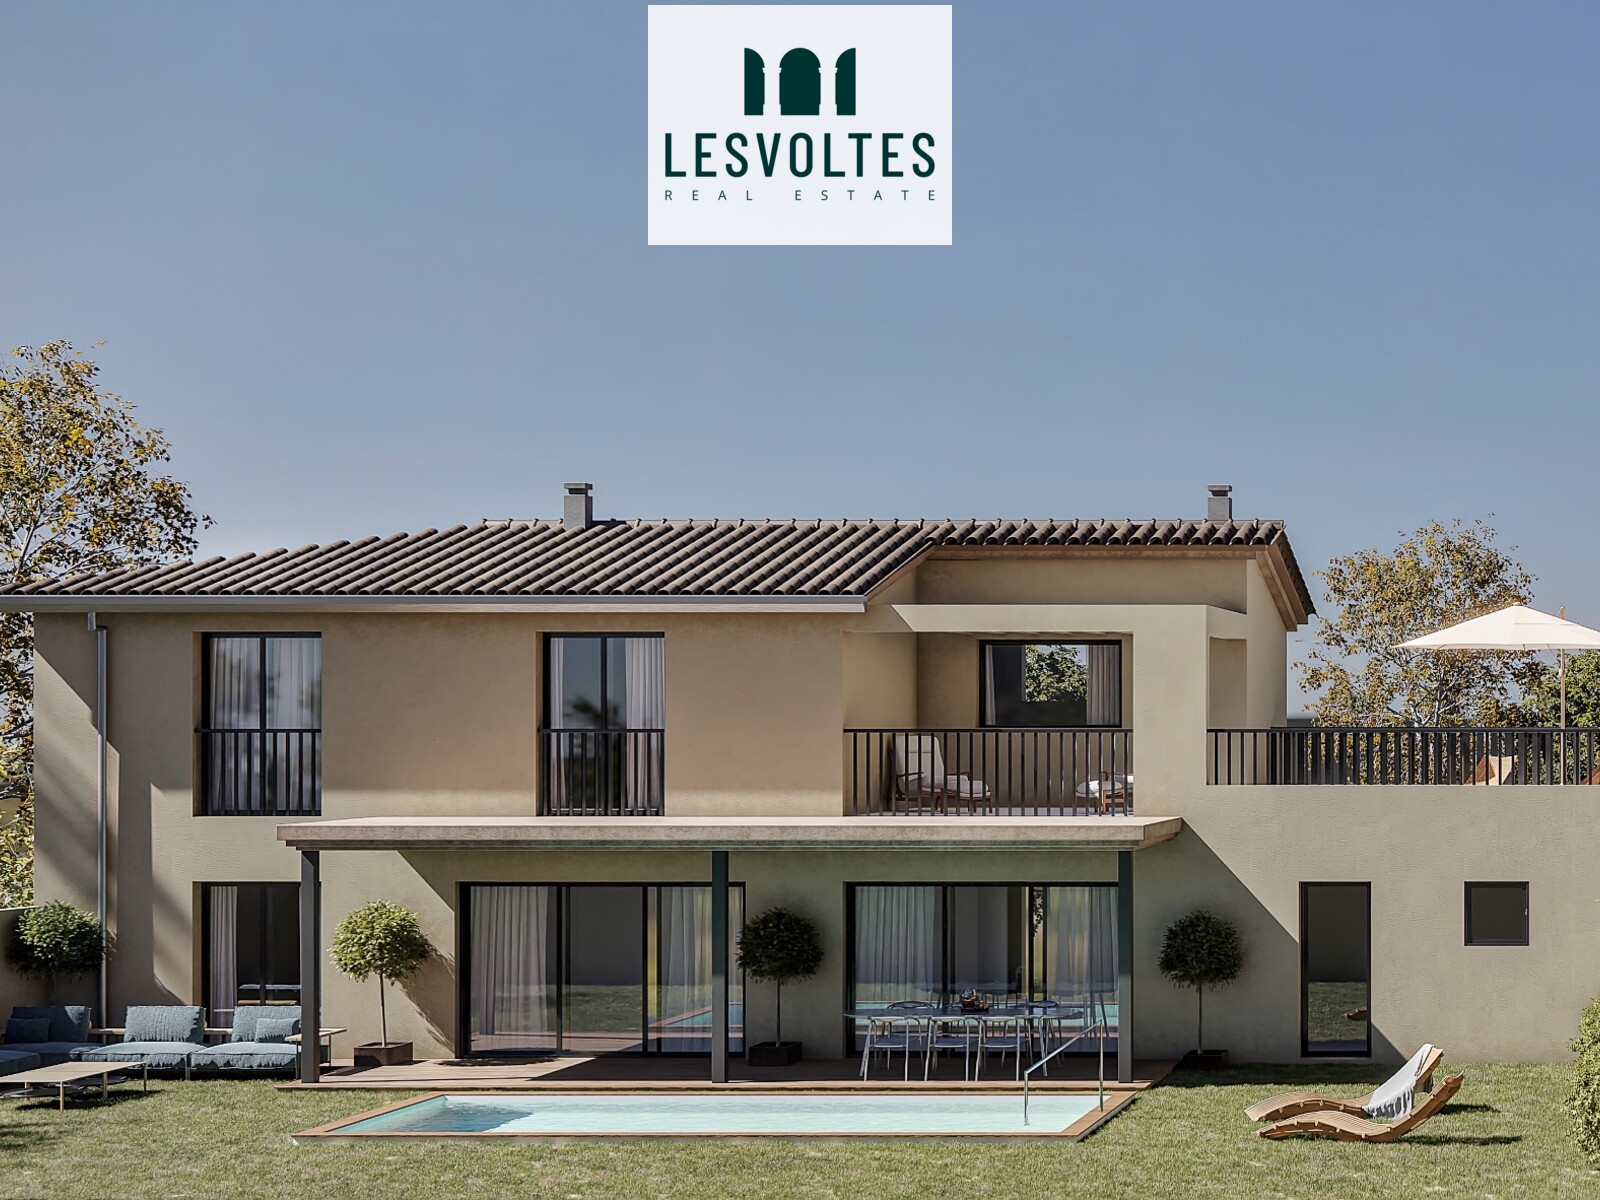 EXCLUSIVE NEWLY BUILT HOUSE WITH PRIVATE GARDEN FOR SALE IN LLOFRIU.